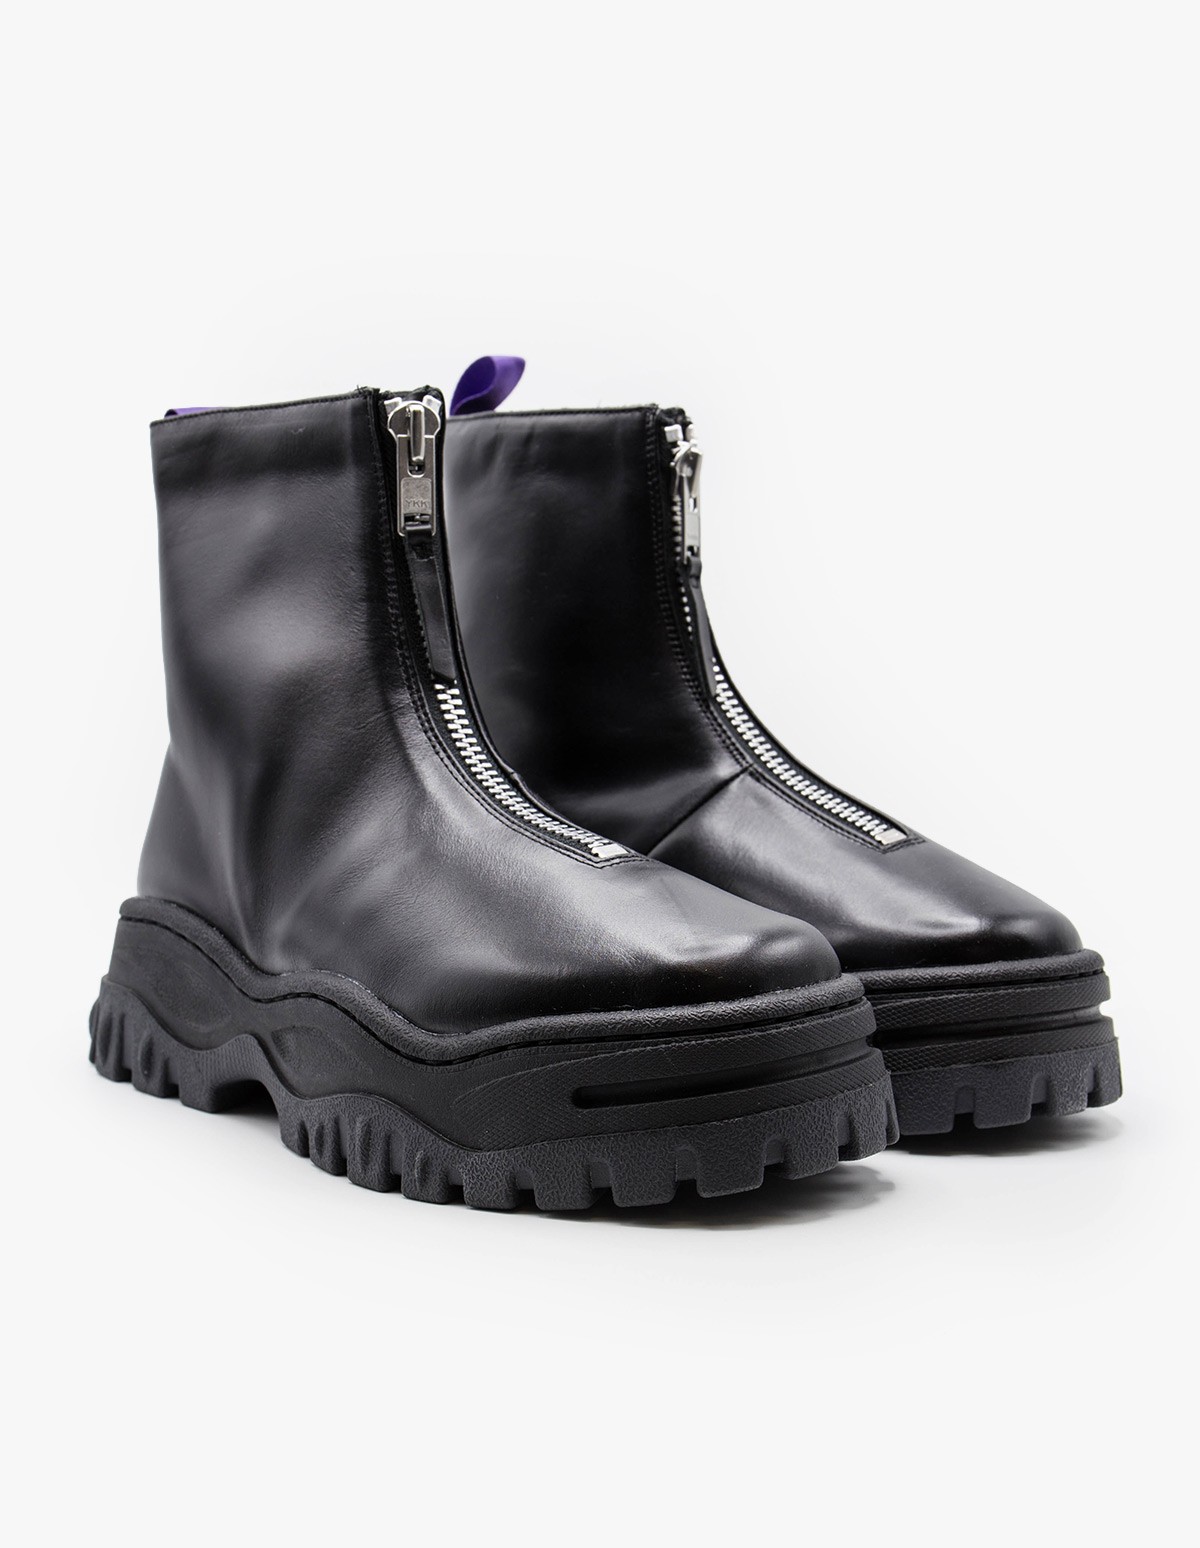 Raven Boots in Black Leather - Eytys | Afura Store